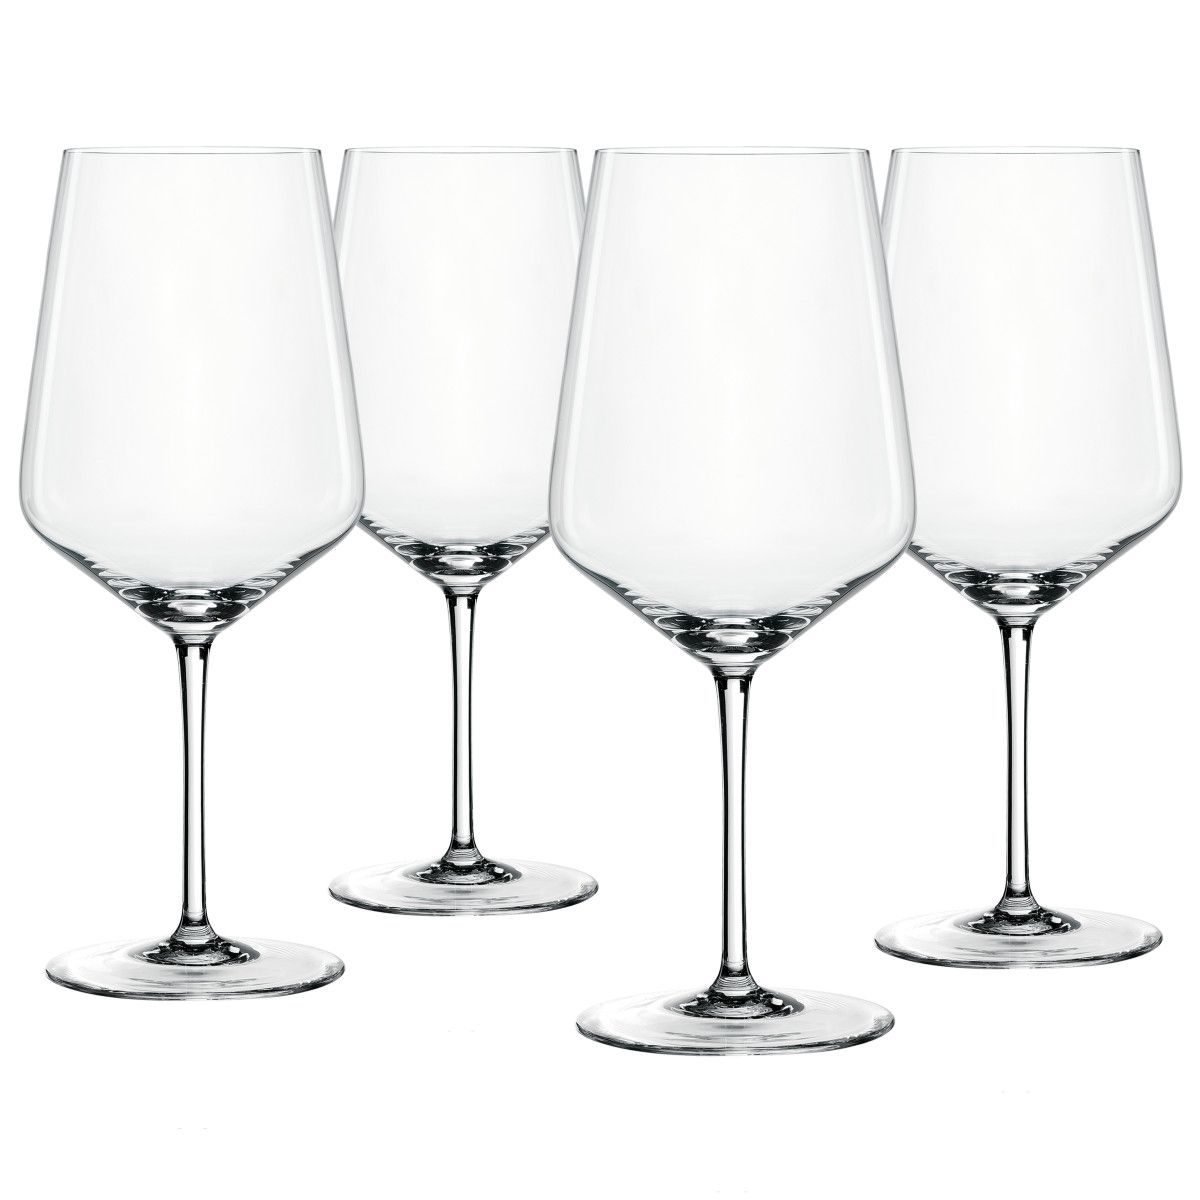 Spiegelau Style Red Wine Glasses, Set of 4, European-Made Lead-Free  Crystal, Classic Stemmed, Dishwasher Safe, Professional Quality Red Wine  Glass Gift Set, 22.2 oz